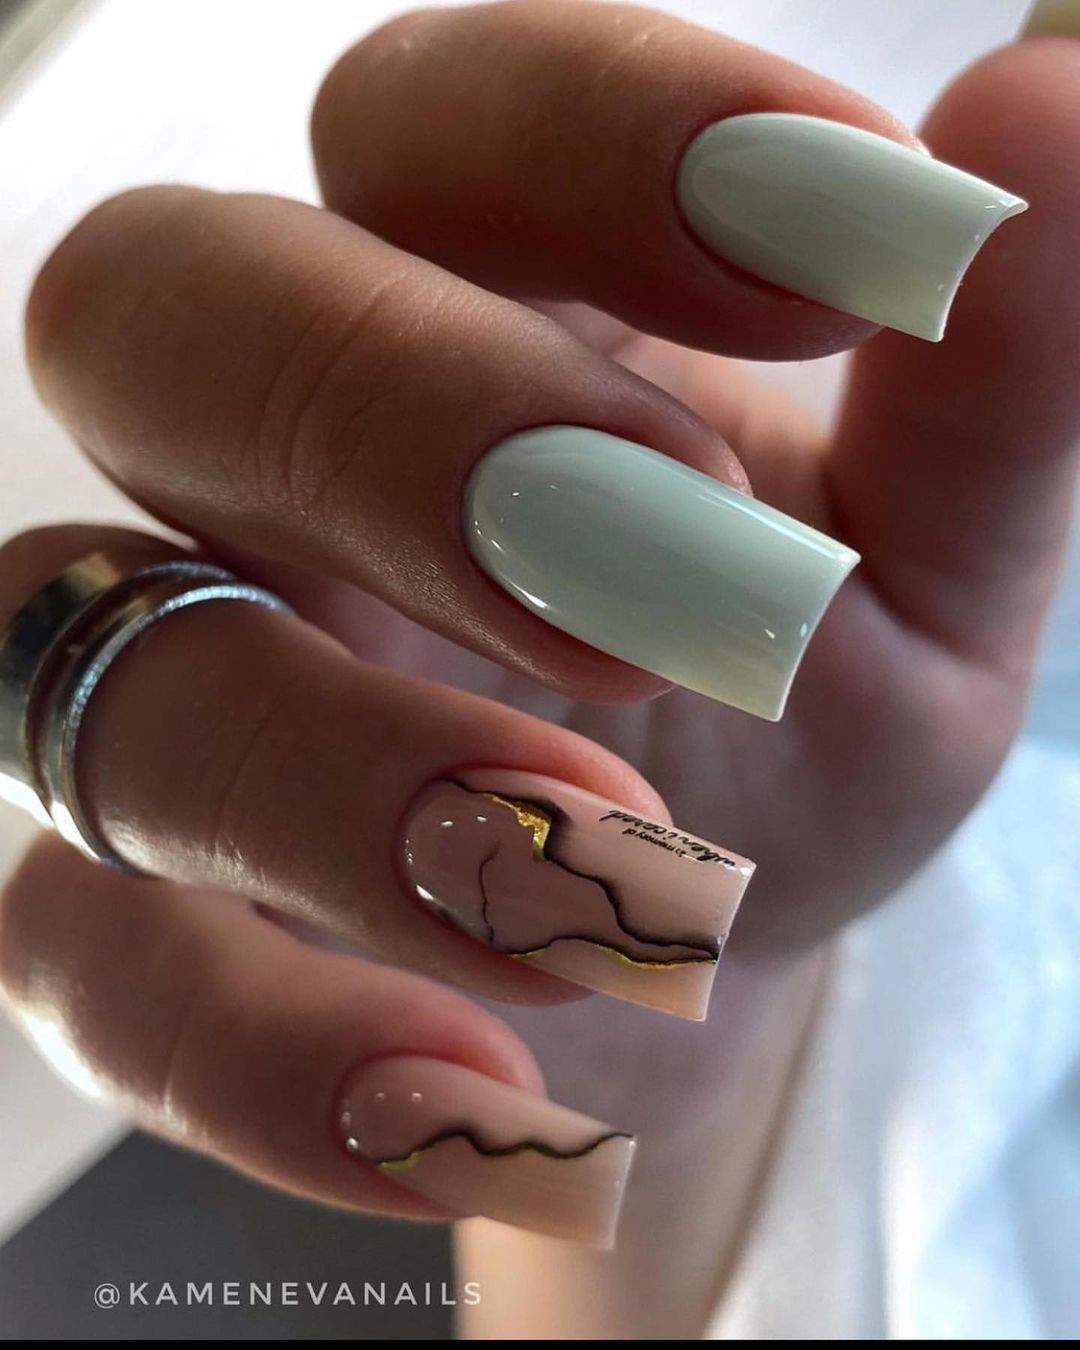 50 Best Nail Designs Trends To Try Out In 2022 images 37